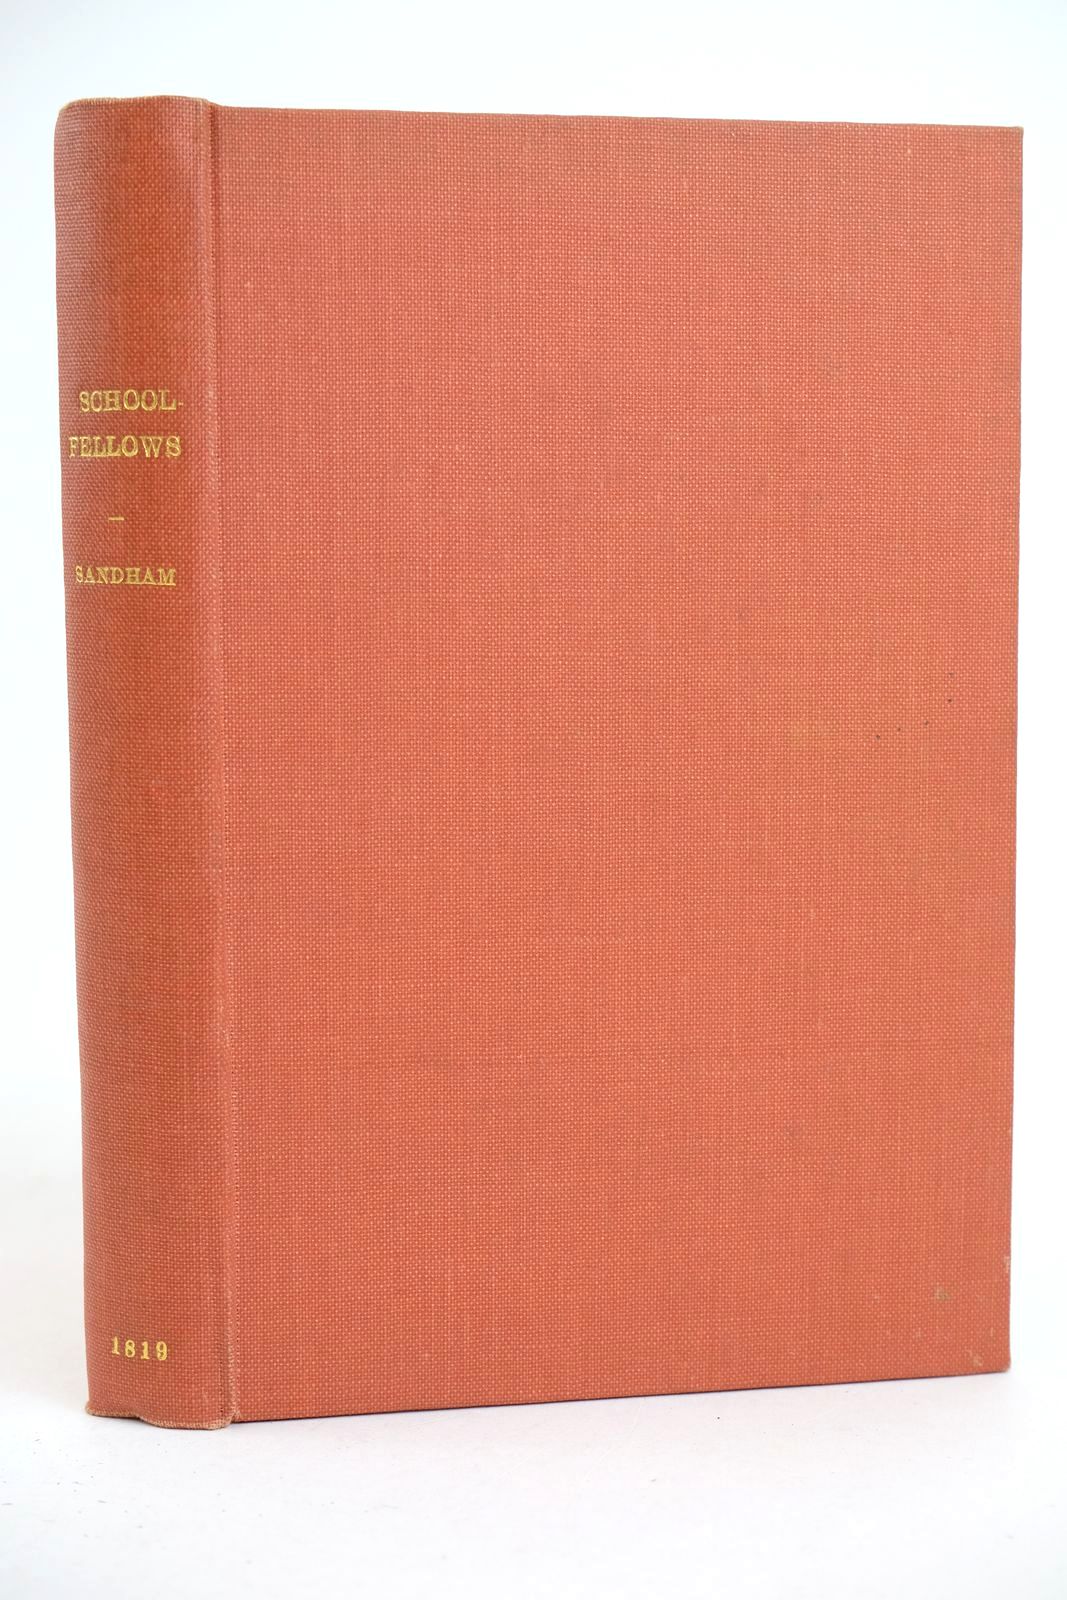 Photo of THE SCHOOL-FELLOWS written by Sandham, Miss published by J. Souter (STOCK CODE: 1318822)  for sale by Stella & Rose's Books